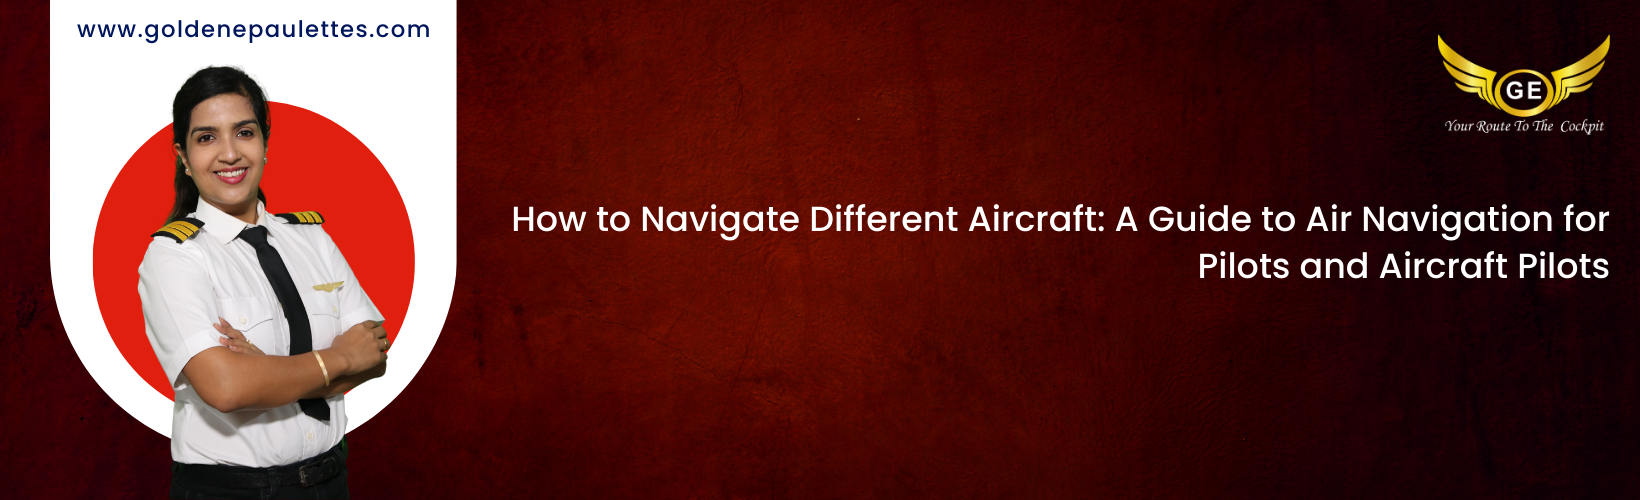 Air Navigation in Different Aircraft